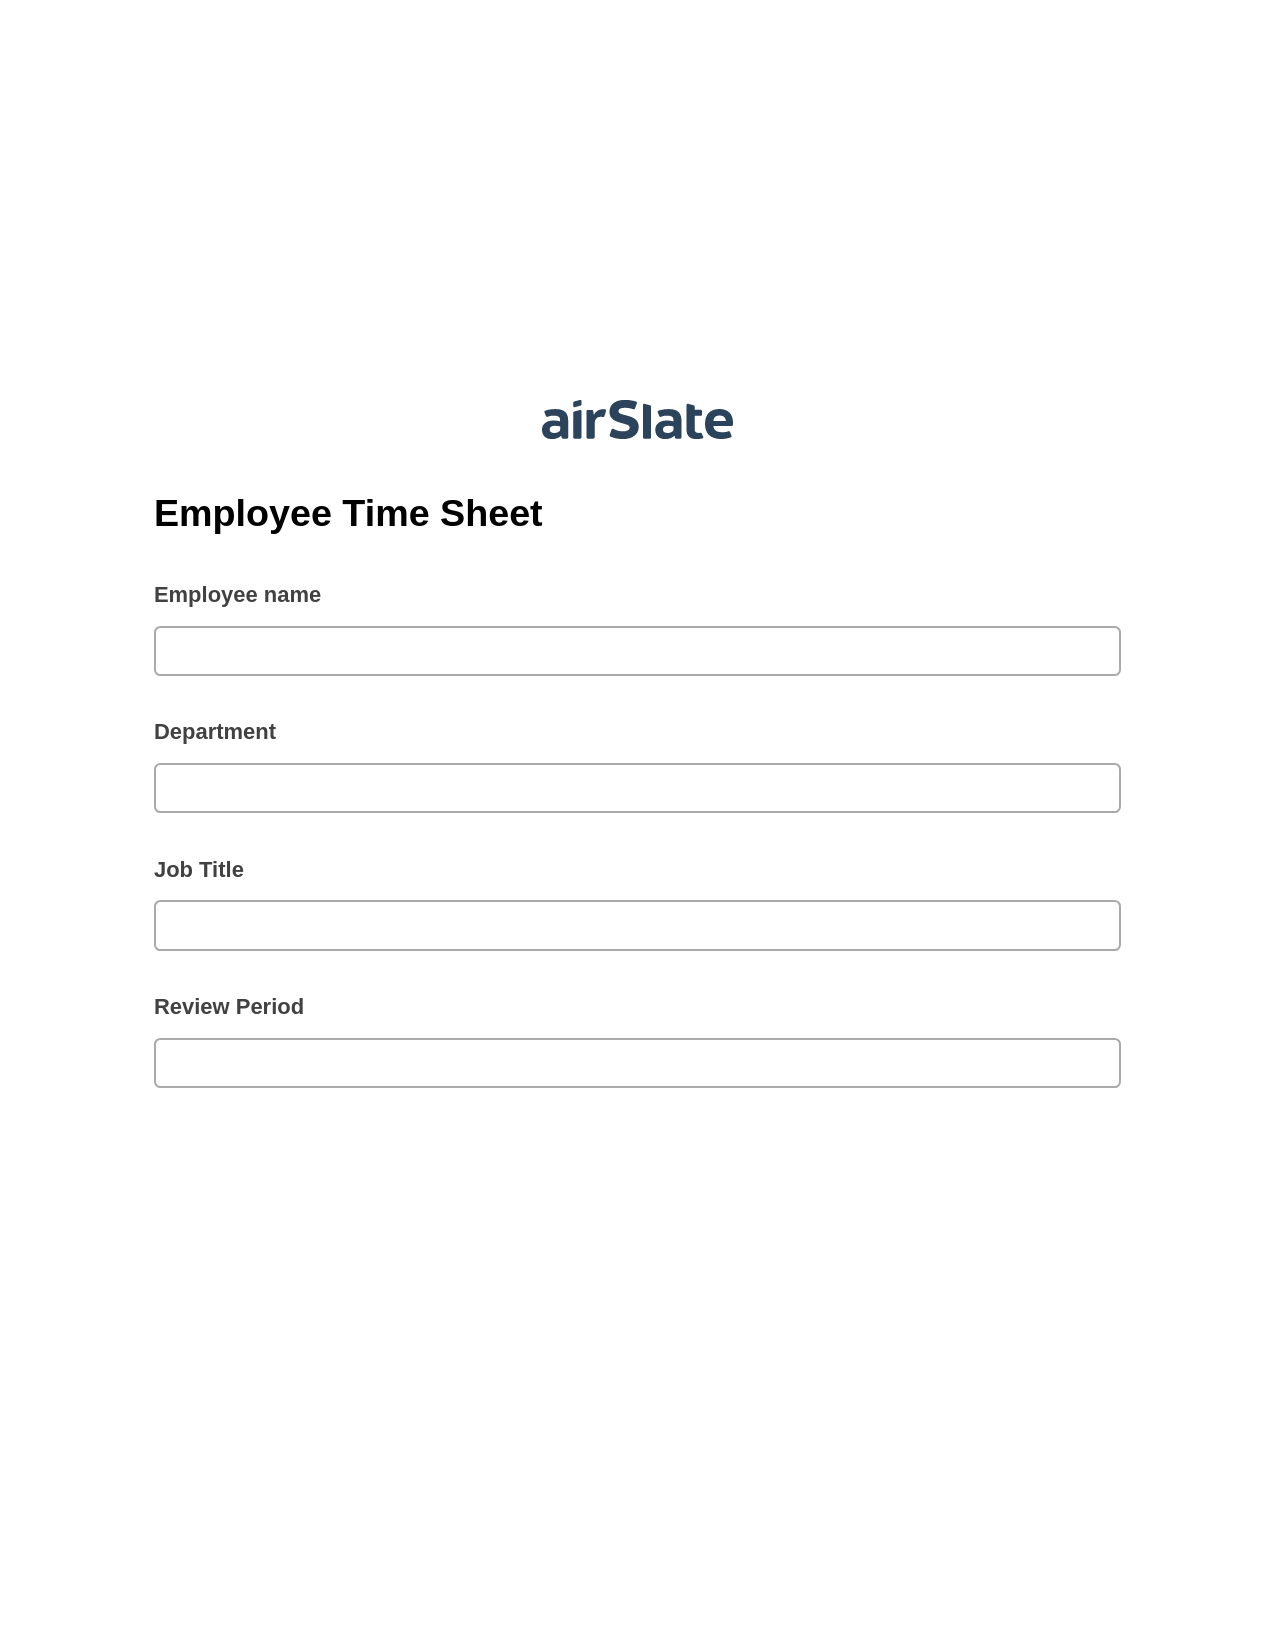 Multirole Employee Time Sheet Pre-fill Dropdowns from CSV file Bot, Update Audit Trail Bot, Archive to SharePoint Folder Bot